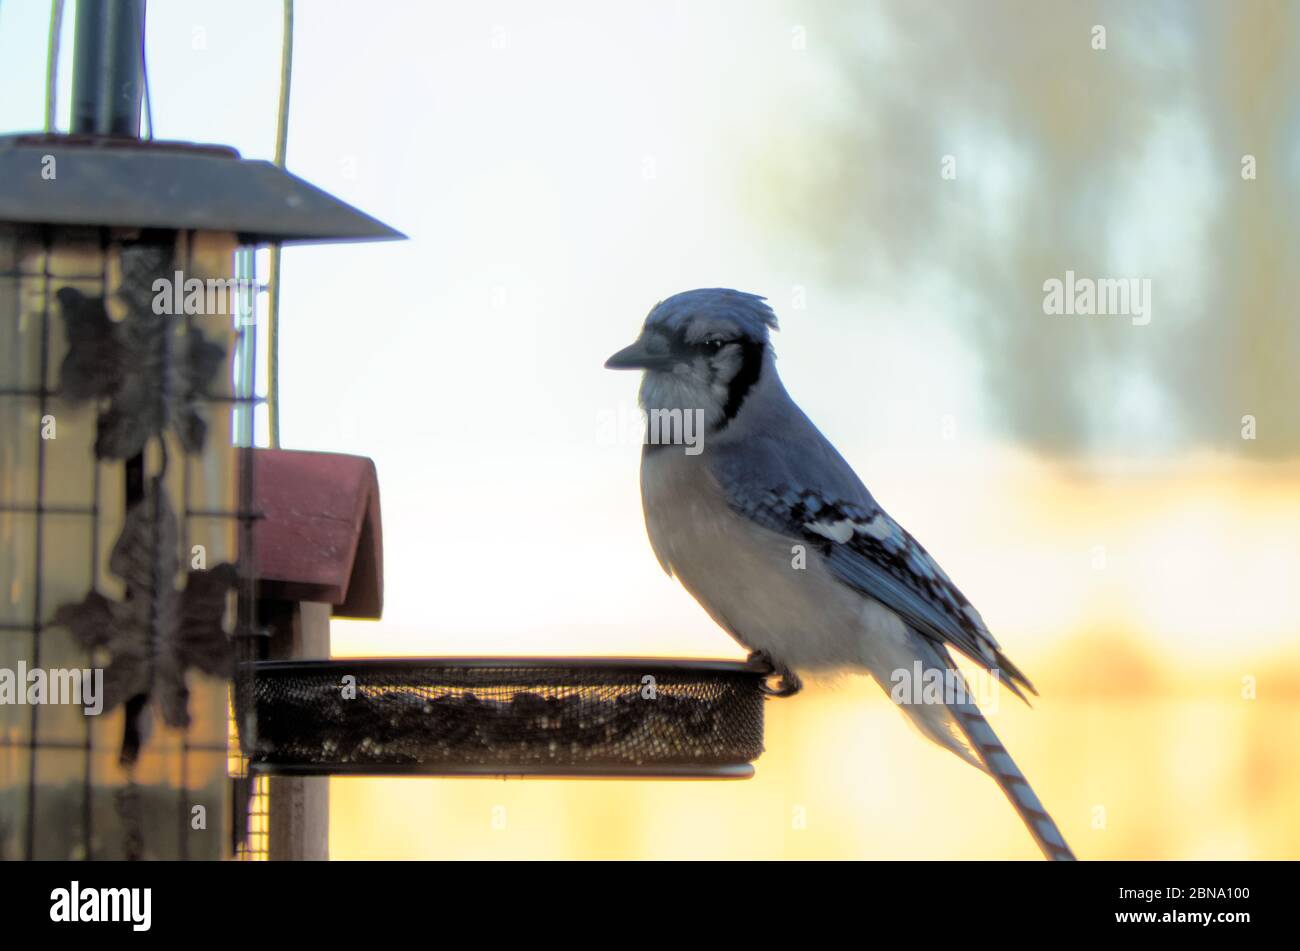 A blue jay (Cyanocitta cristata) perched at a feeder Stock Photo